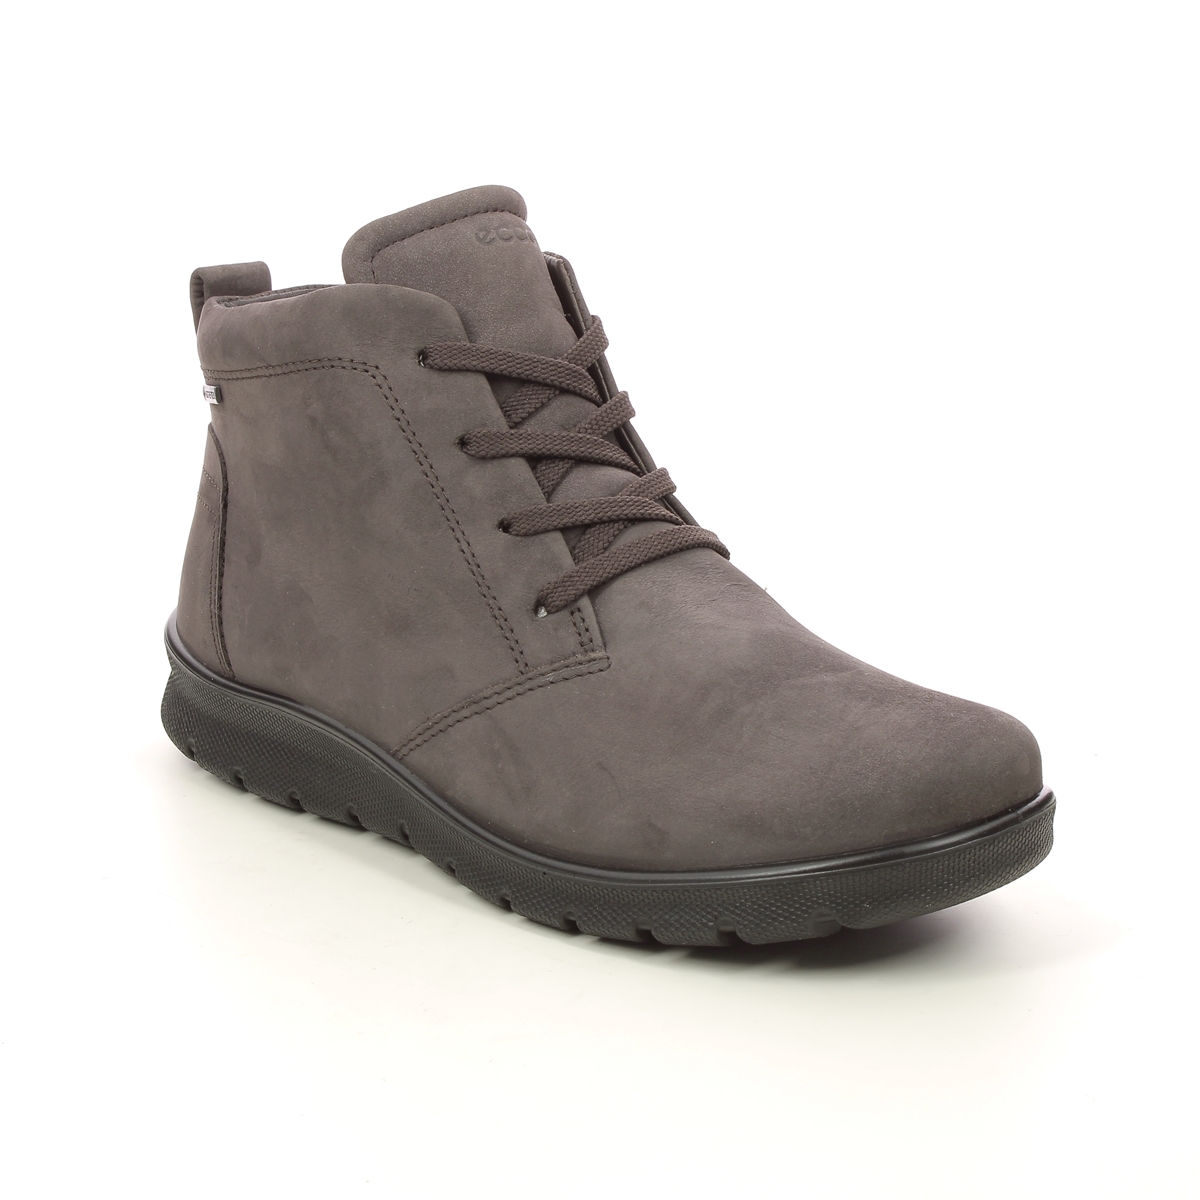 Ecco Babett Lo Gtx Brown Nubuck Womens Lace Up Boots 215583-02576 In Size 41 In Plain Brown Nubuck